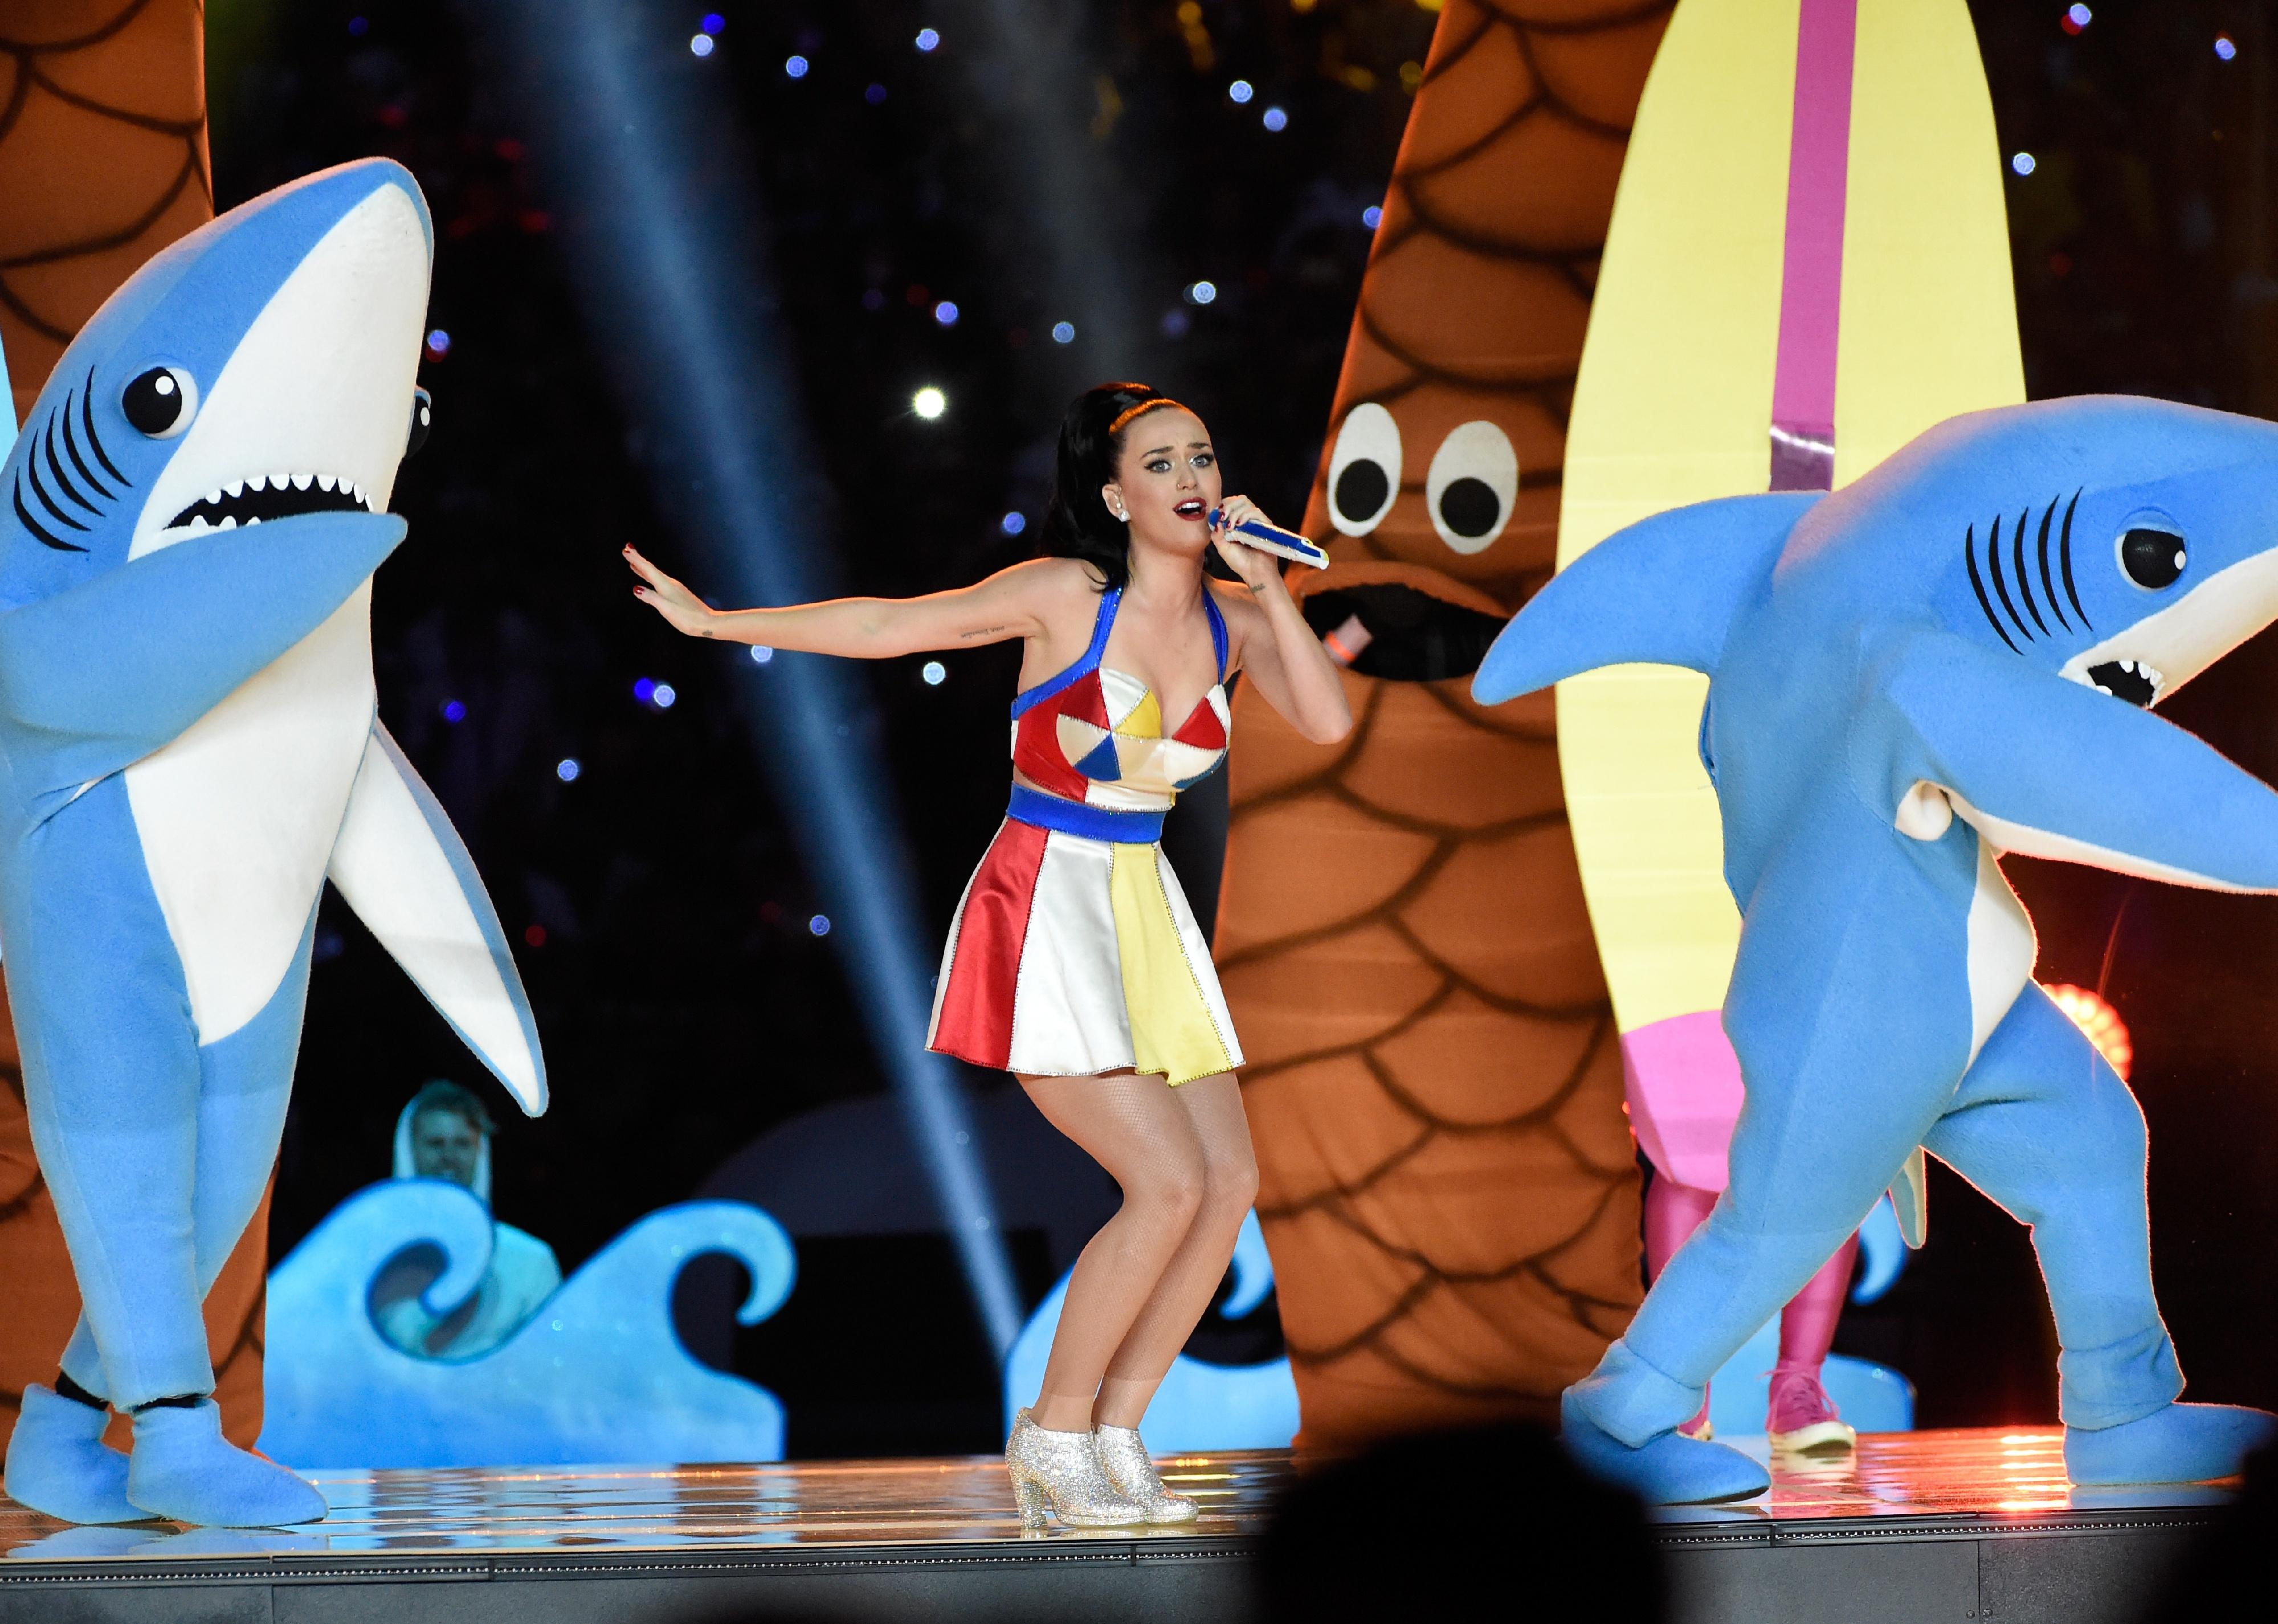 Katy Perry performs on stage during the Pepsi Super Bowl XLIX Halftime Show.